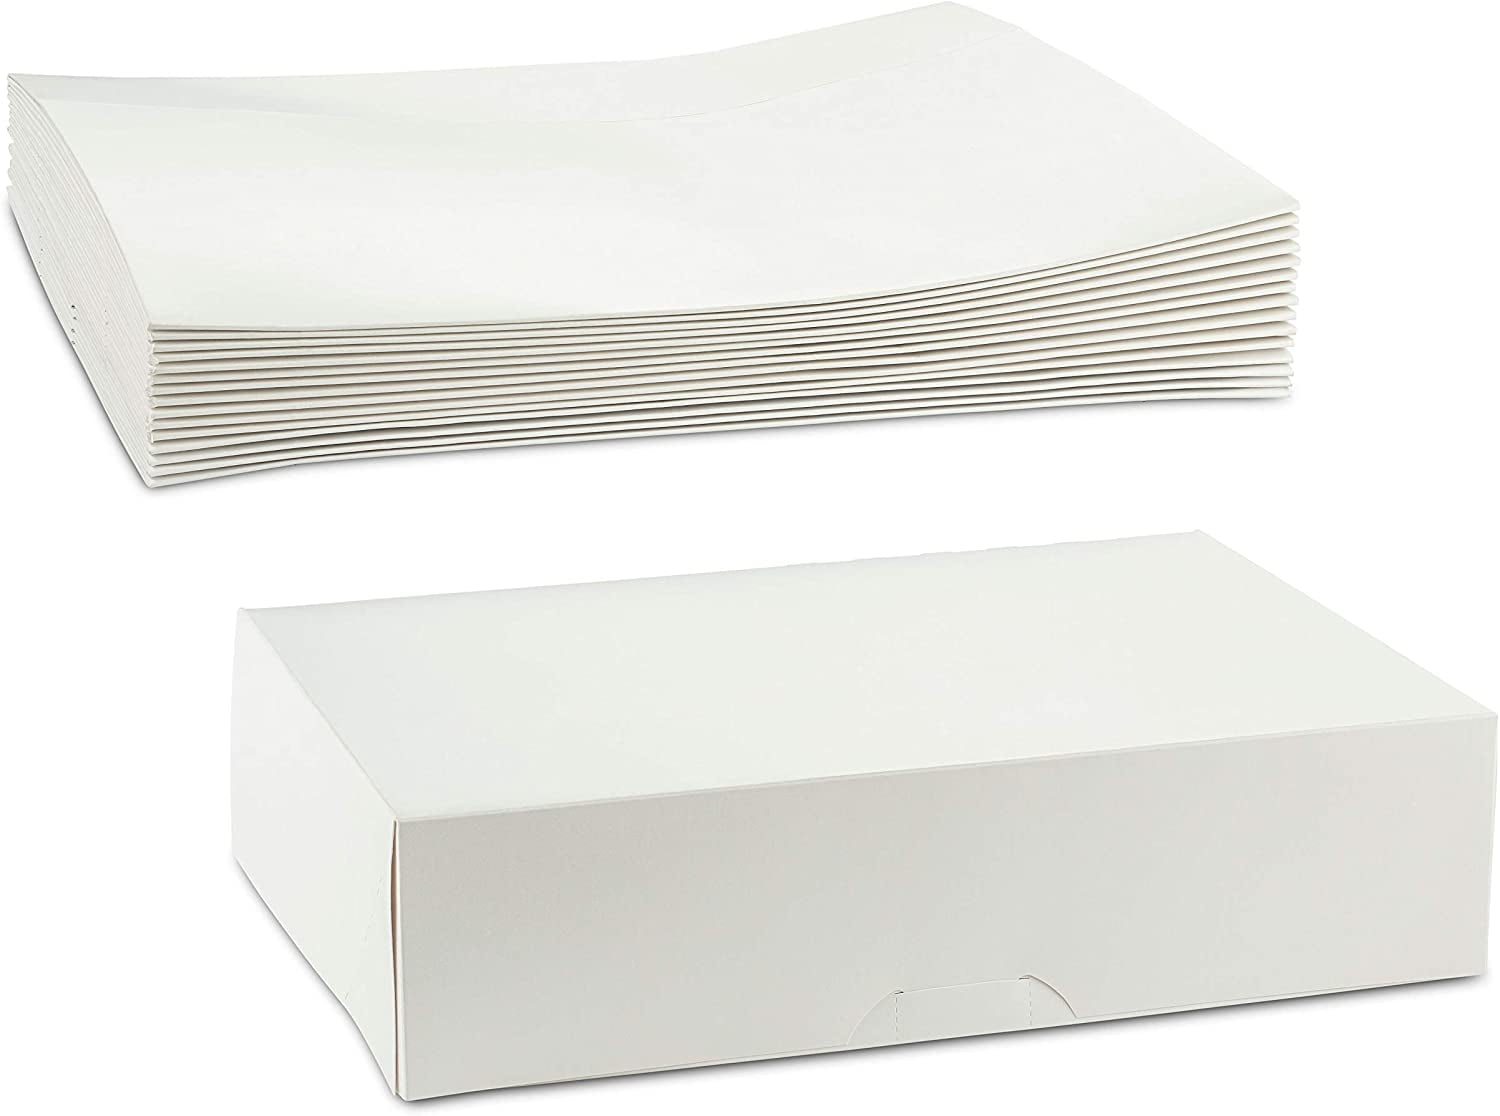 Pack of 15 5.5" x 5.5" x 4" Clay Coated Paperboard White Bakery Box 